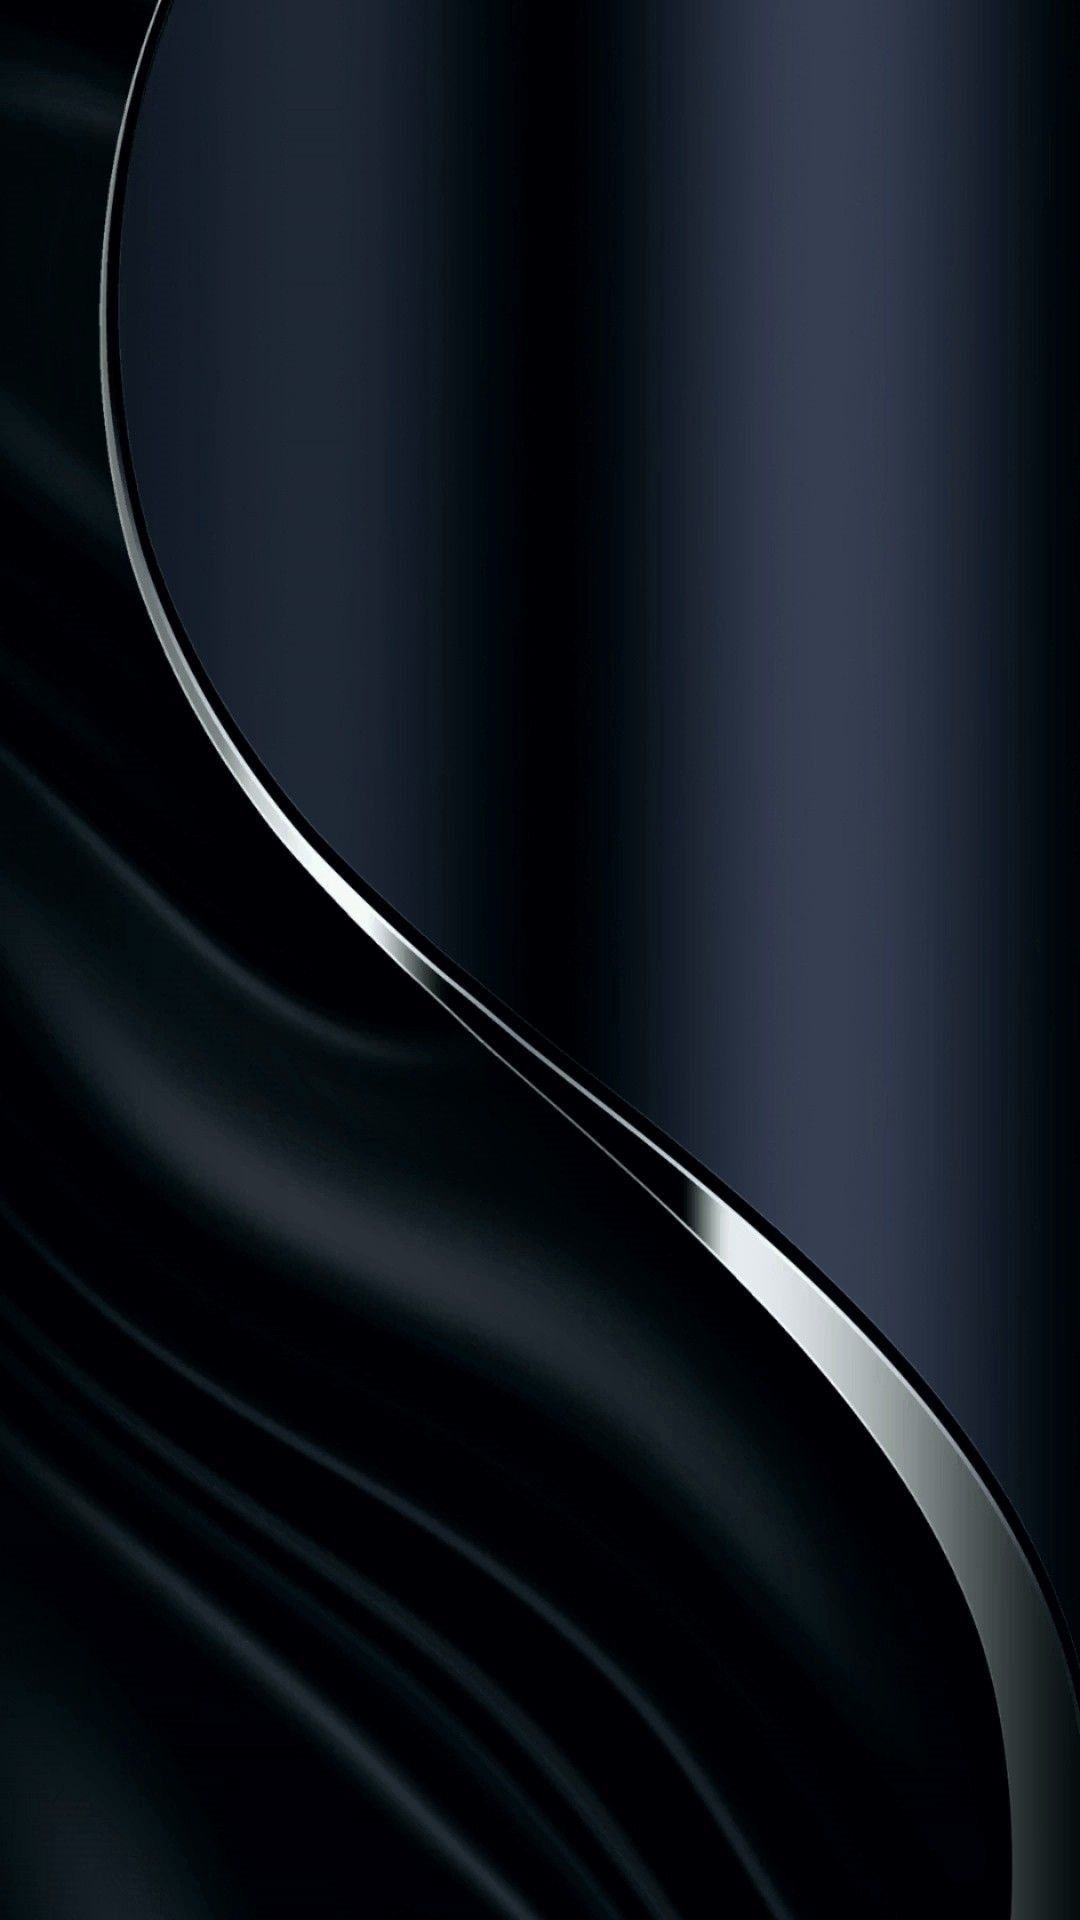 Abstract Blue Silver Wallpaper Mobile. Silver wallpaper, Abstract iphone wallpaper, Dark phone wallpaper